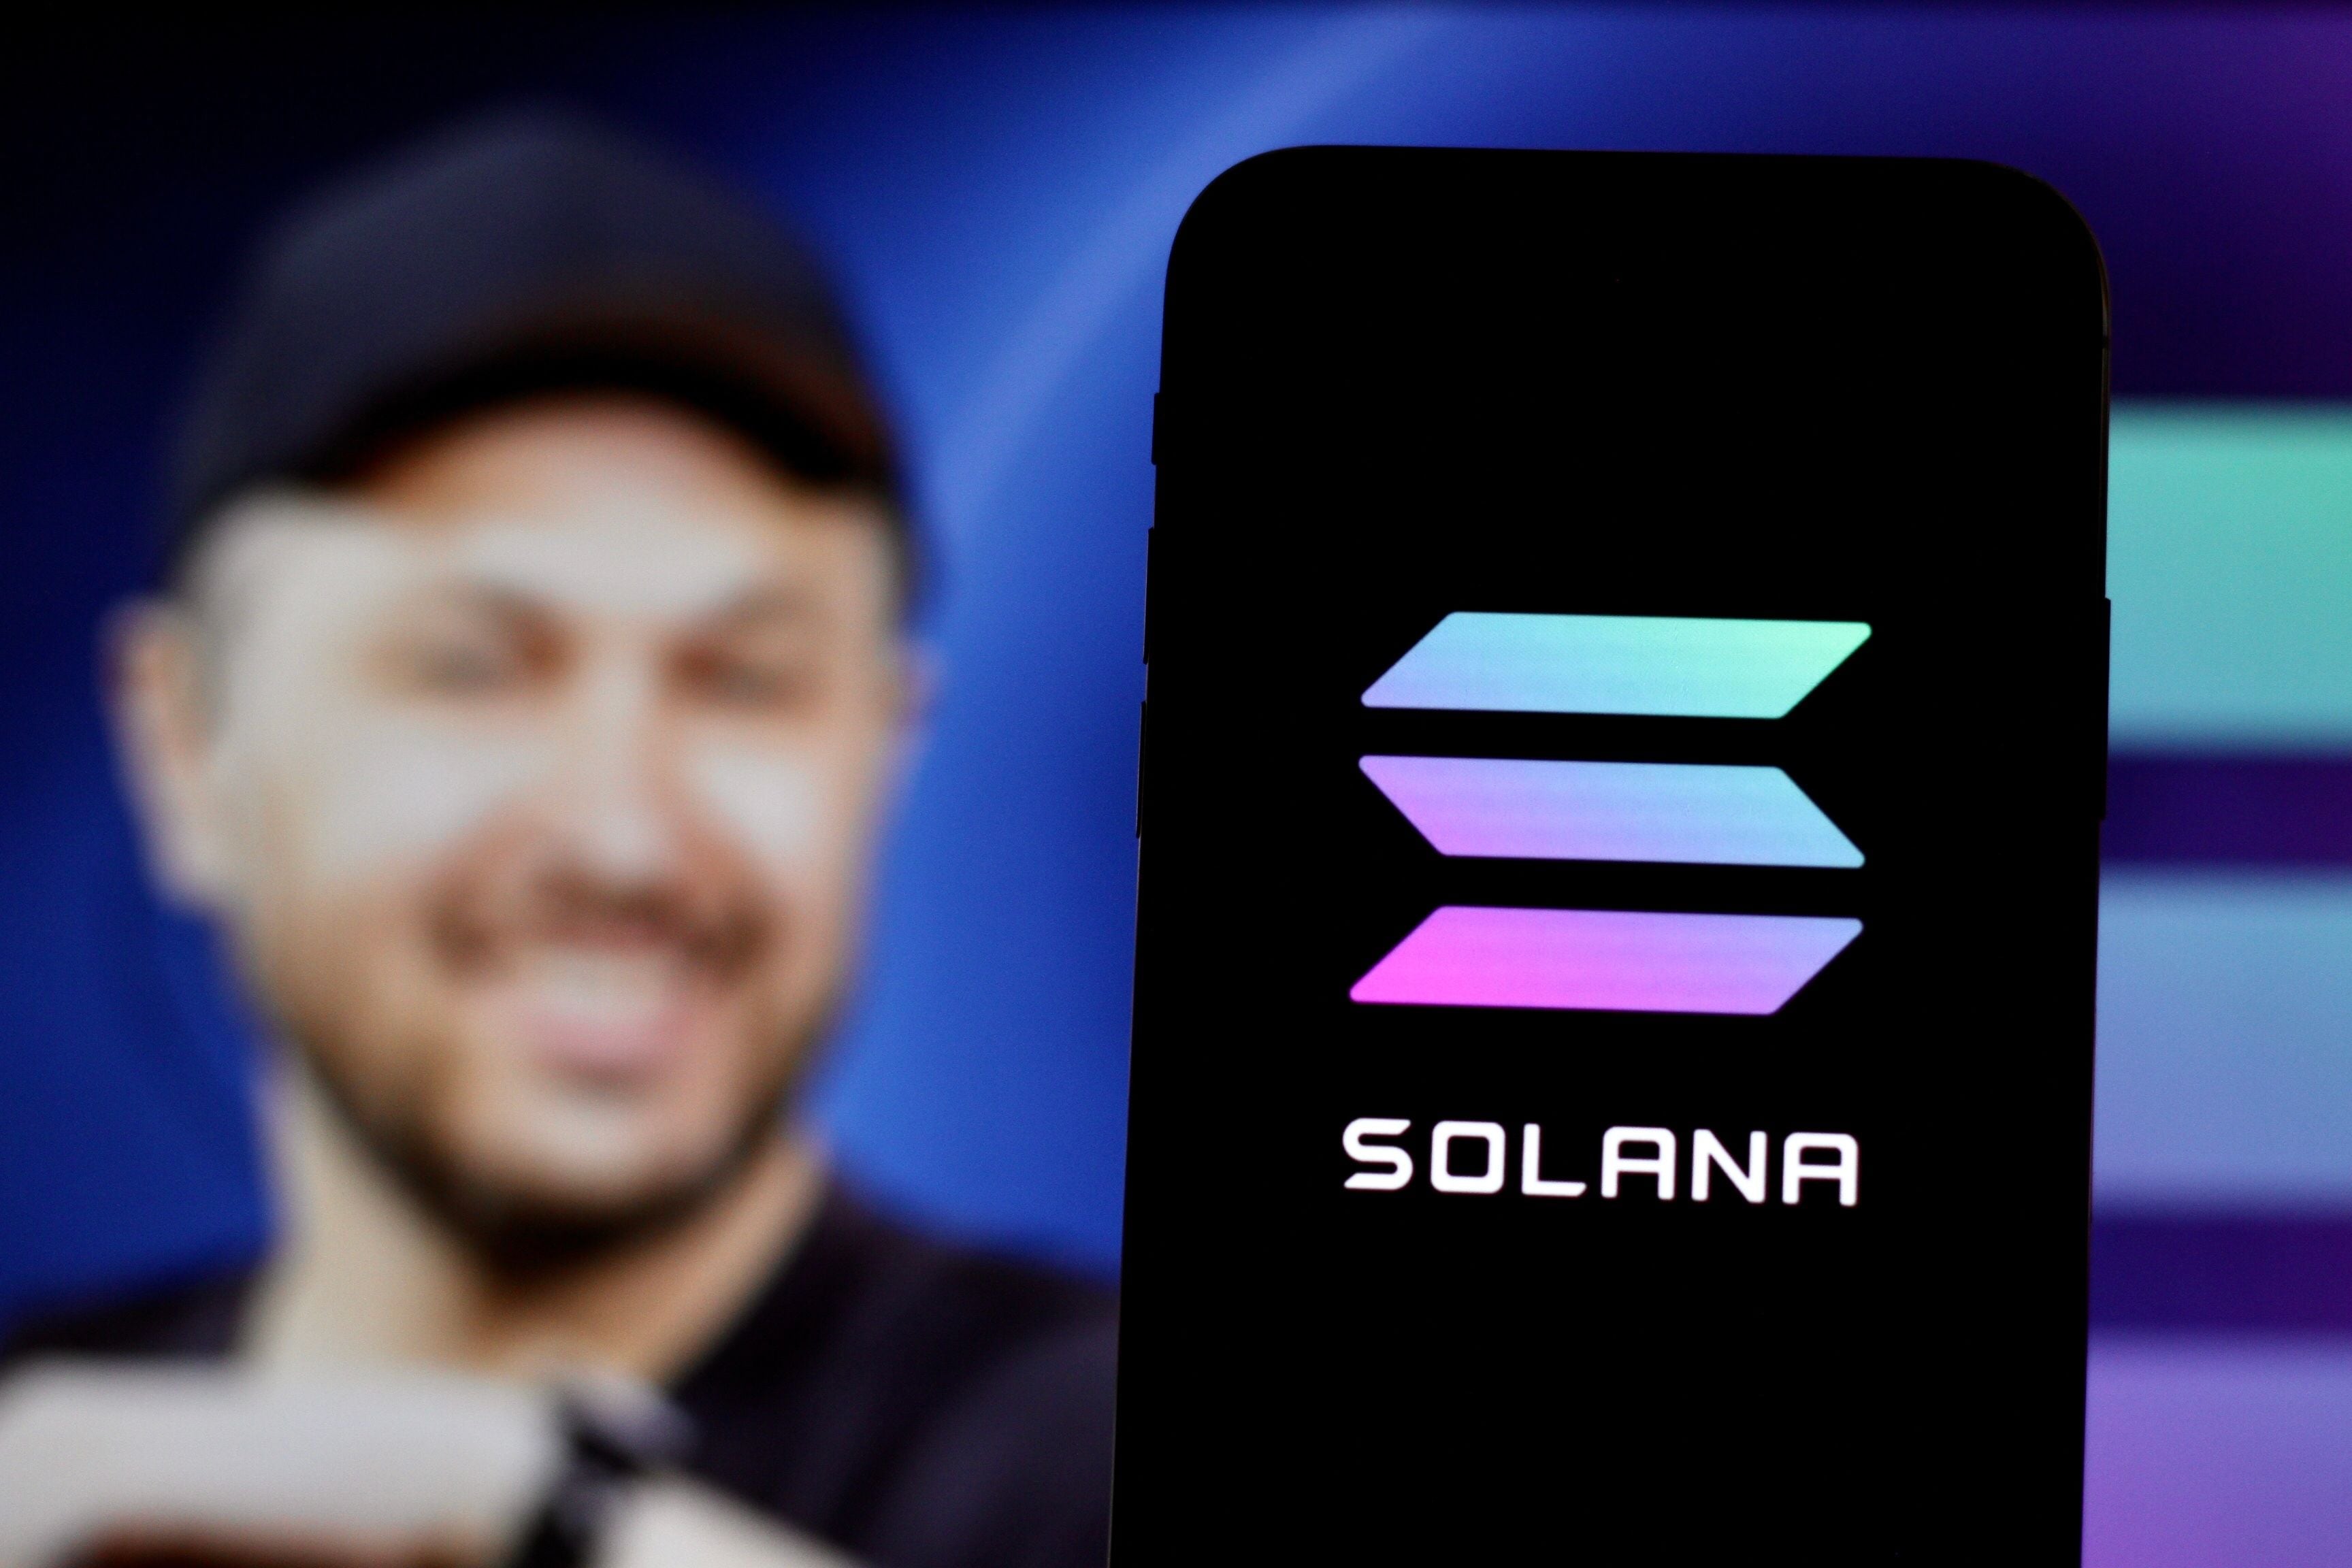 Solana CEO Anatoly Yakovenko appeared at an event in Indonesia in May with a mobile phone sporting the Solana logo. Photocredit: Muhammad Alimaki/ Shutterstock